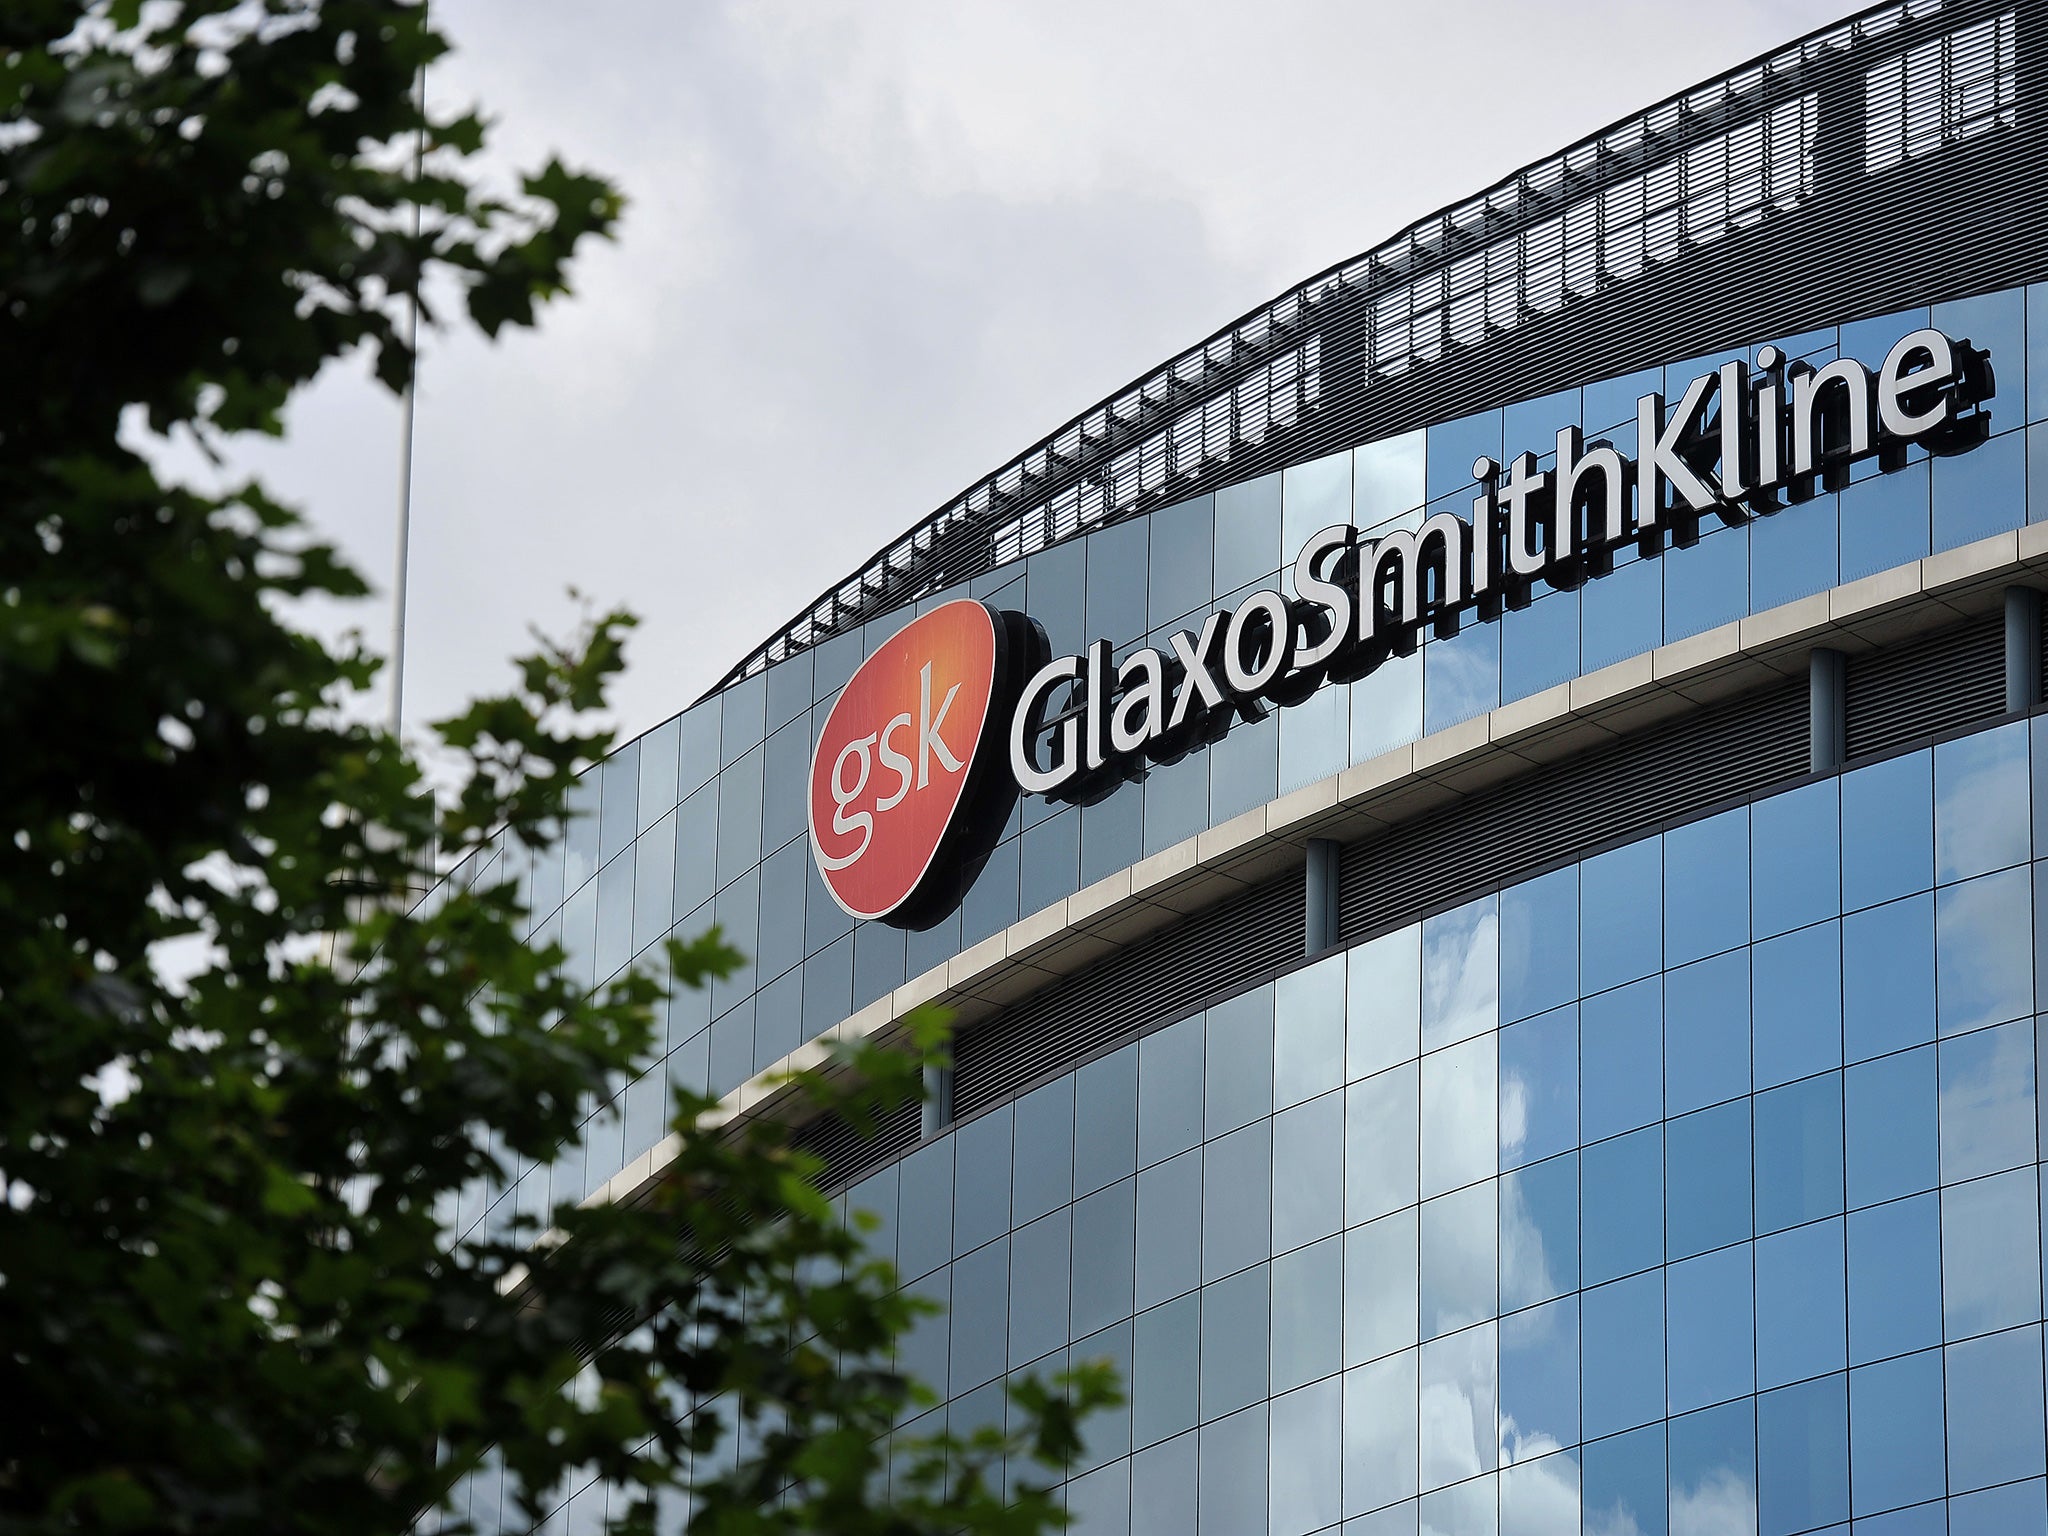 GSK has had a longstanding role in HIV treatments